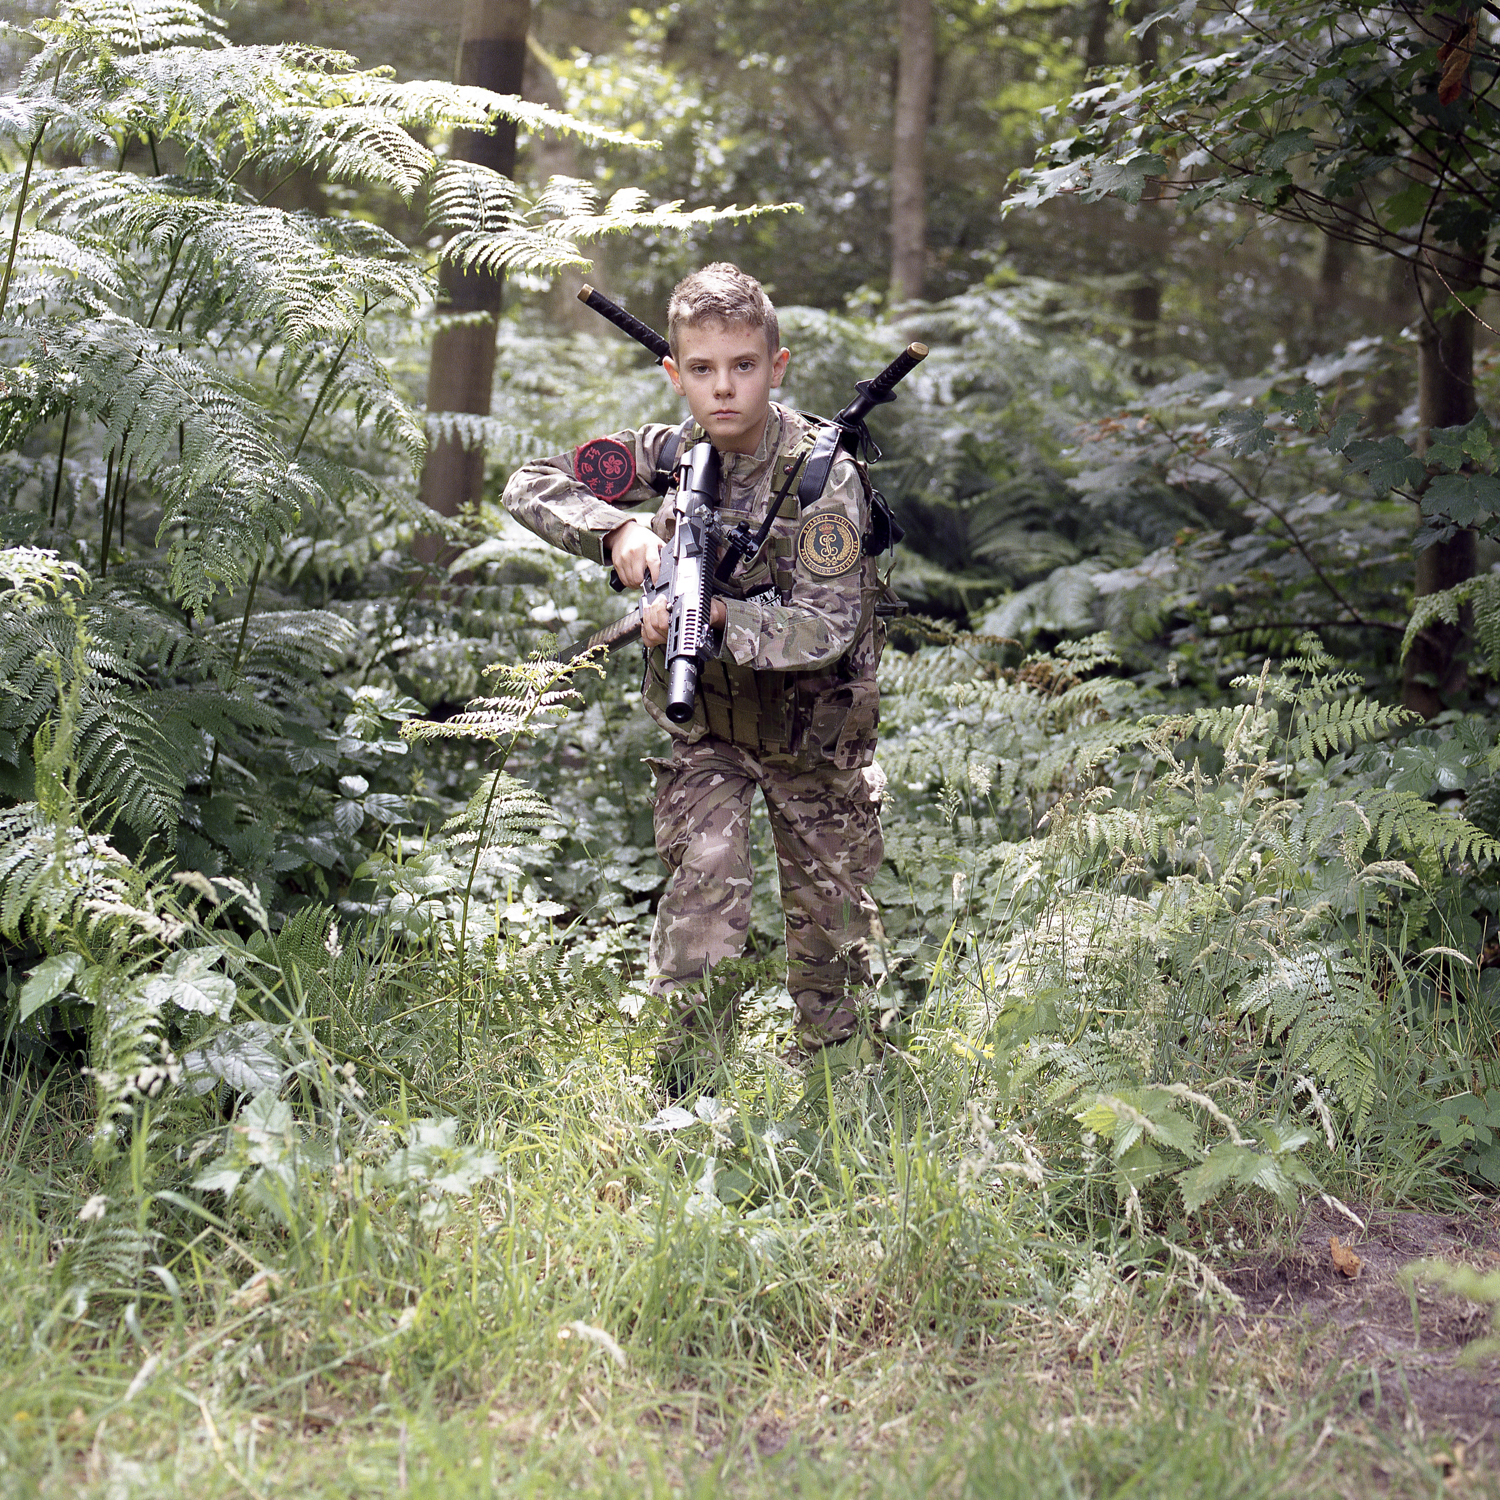 A young boy with shaved hair stands amongst several large bushes, appearing as if in a jungle. They are holding a small toy smg in one hand and are staring defiantly into the camera.